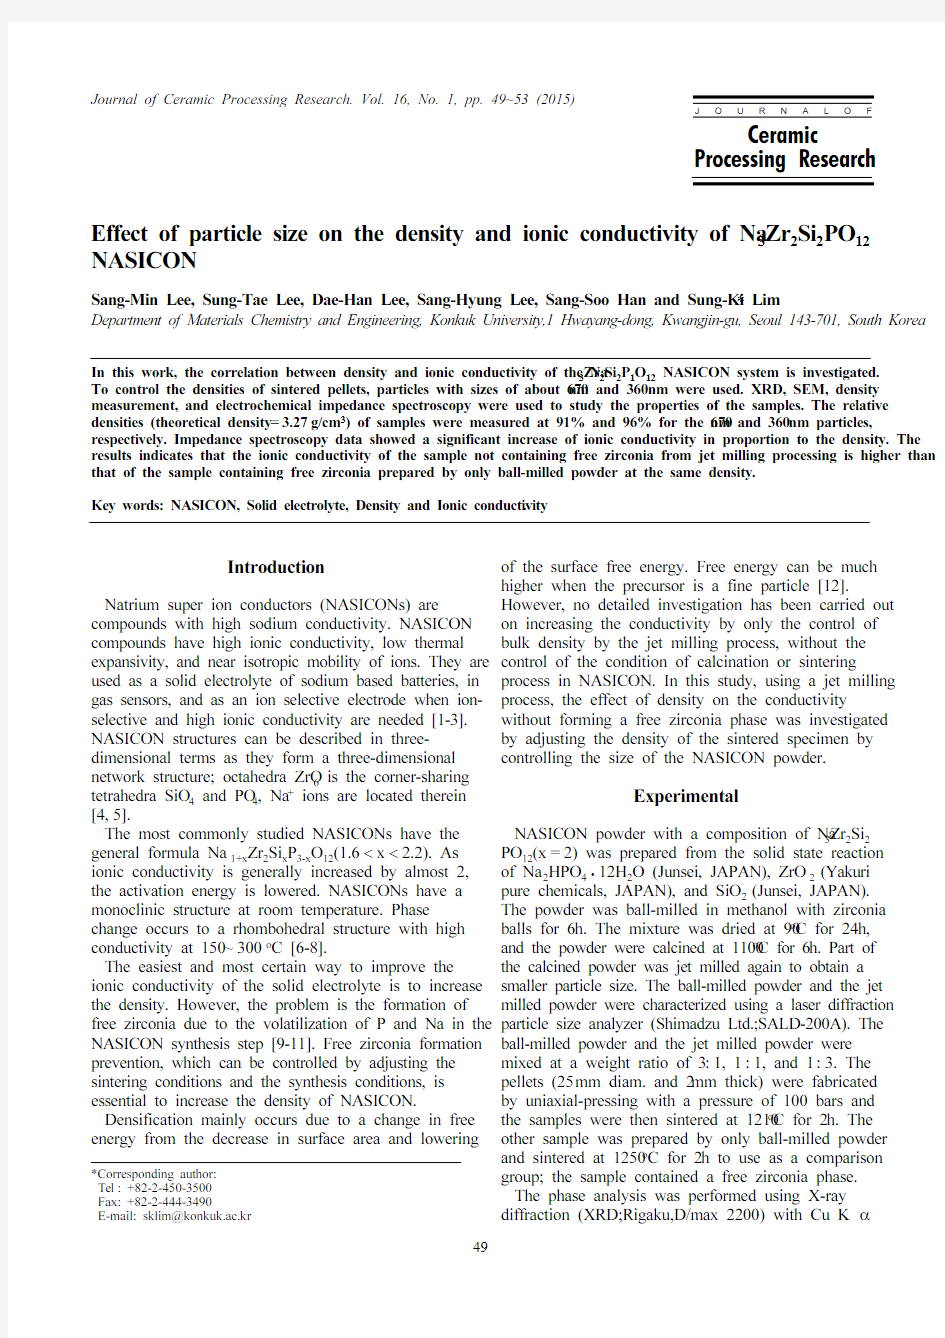 15.Effect of particle size on the density and ionic conductivity of Na 3 Zr 2 Si 2 PO 12NASICON